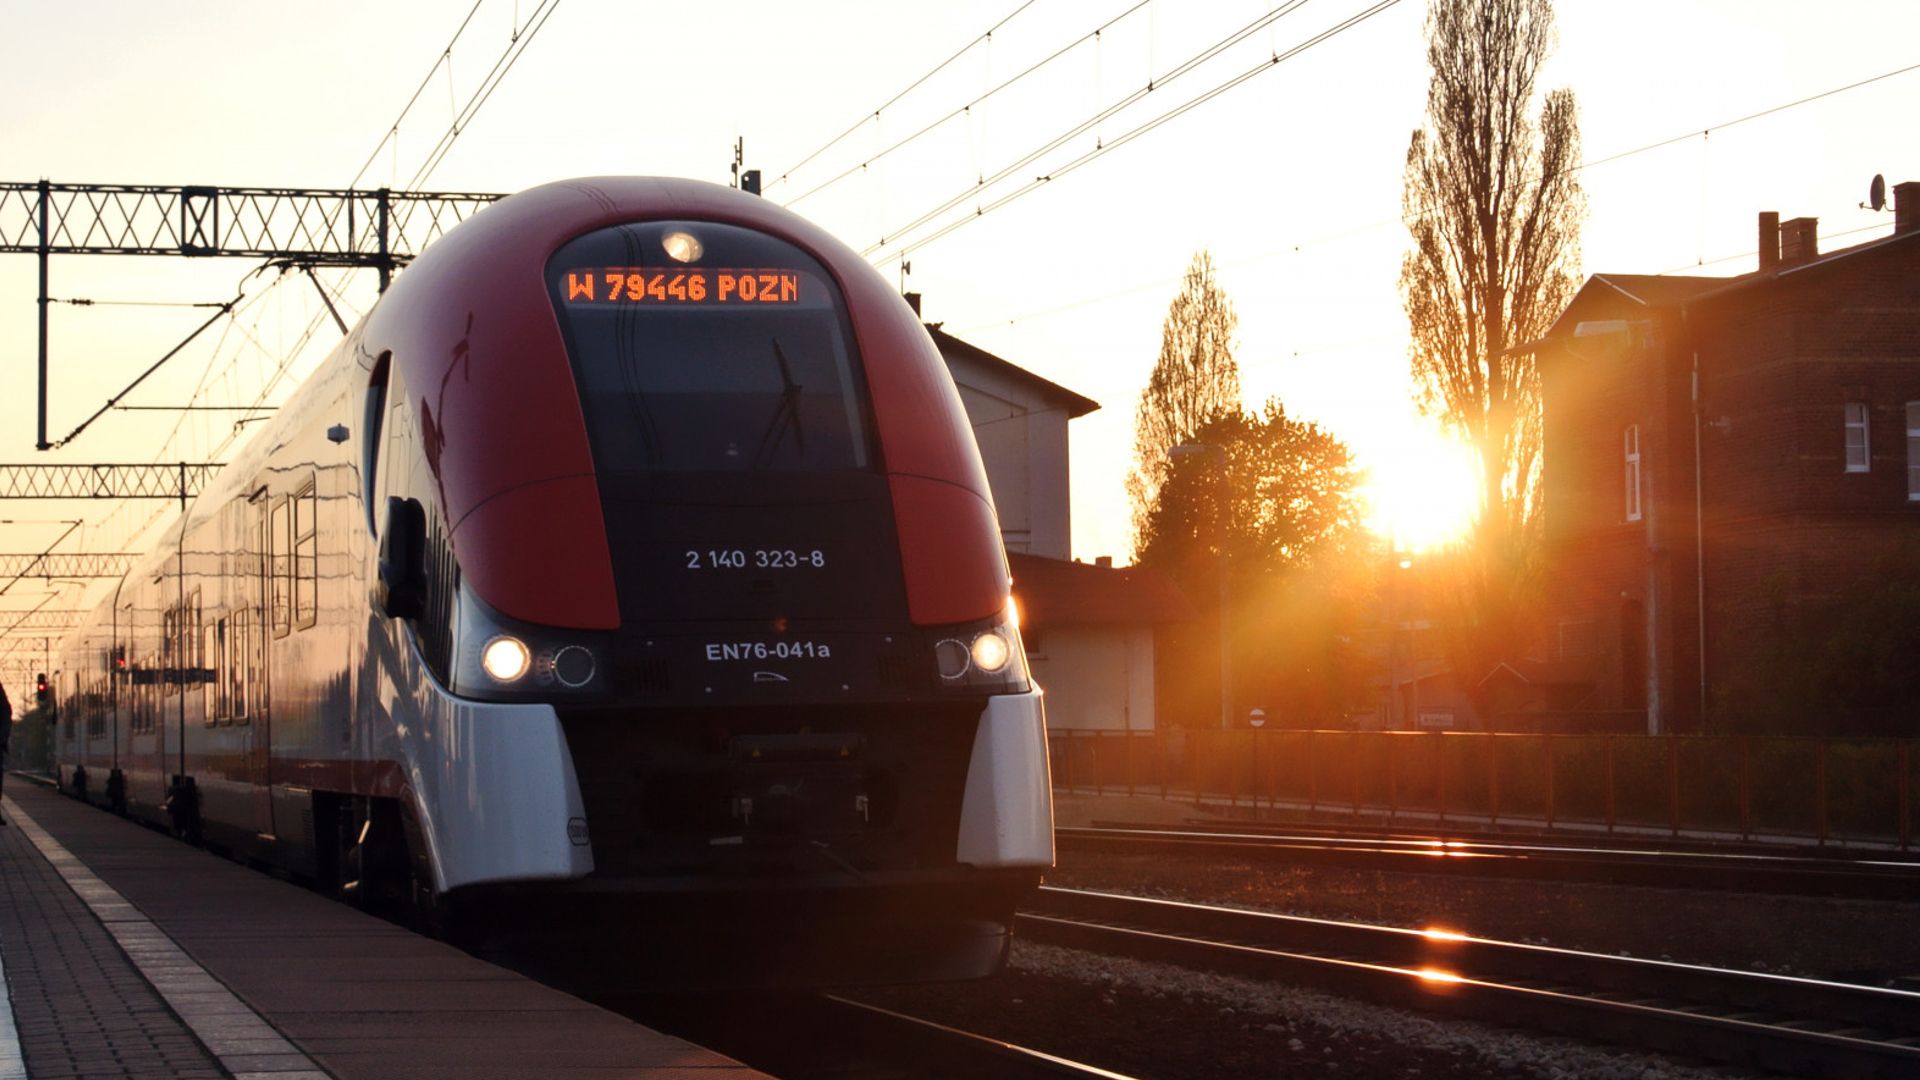 In Poland trains stopped all over the country due to failures